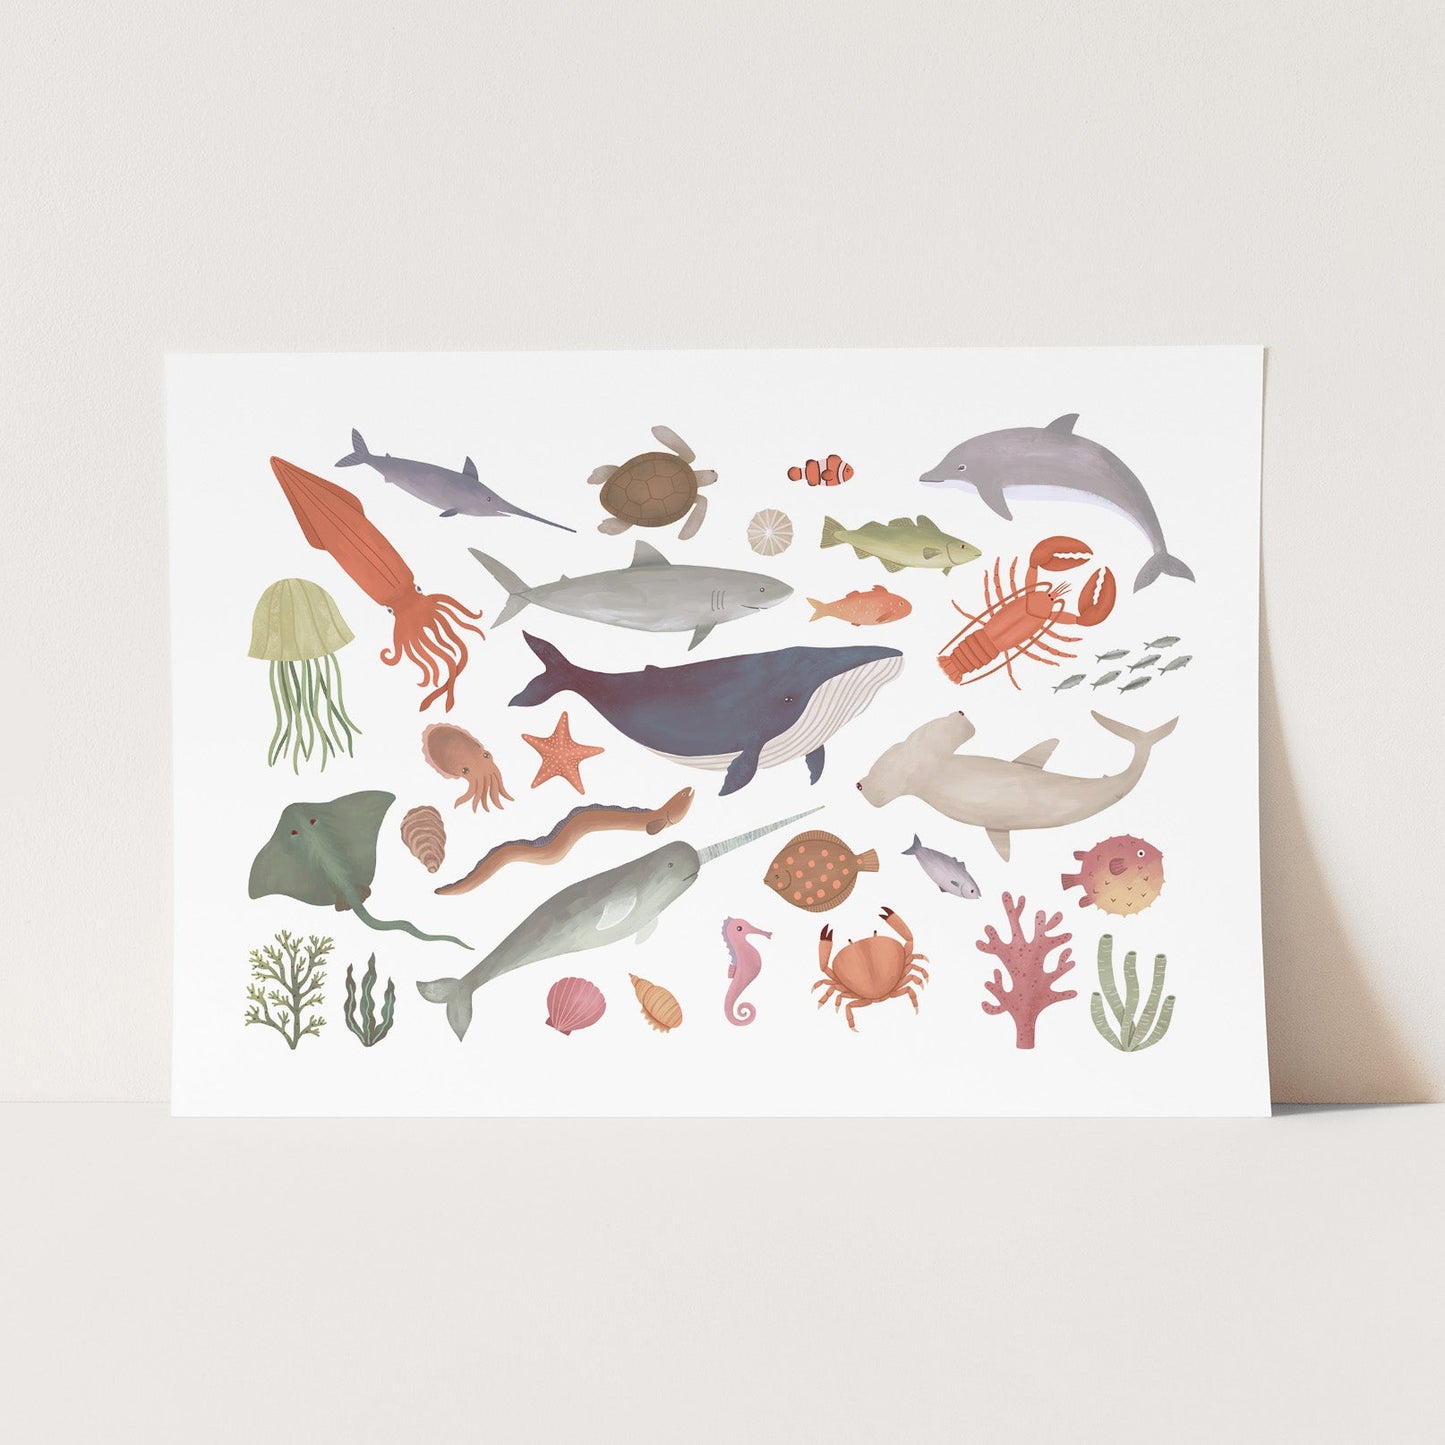 Ocean Life Art Print by Kid of the Village (6 Sizes Available)